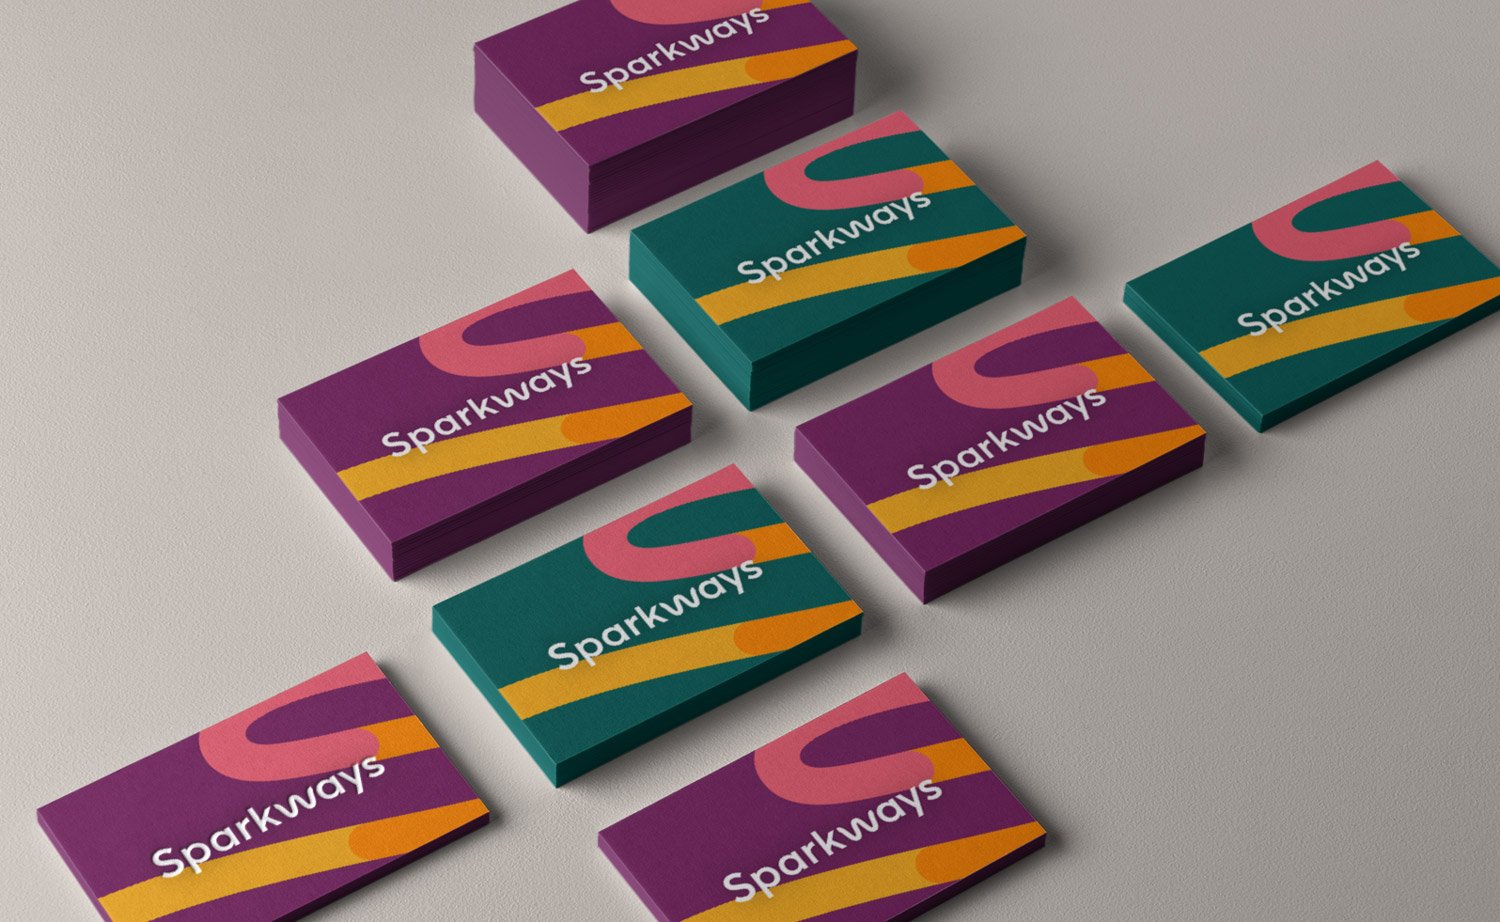 Sparkways business cards